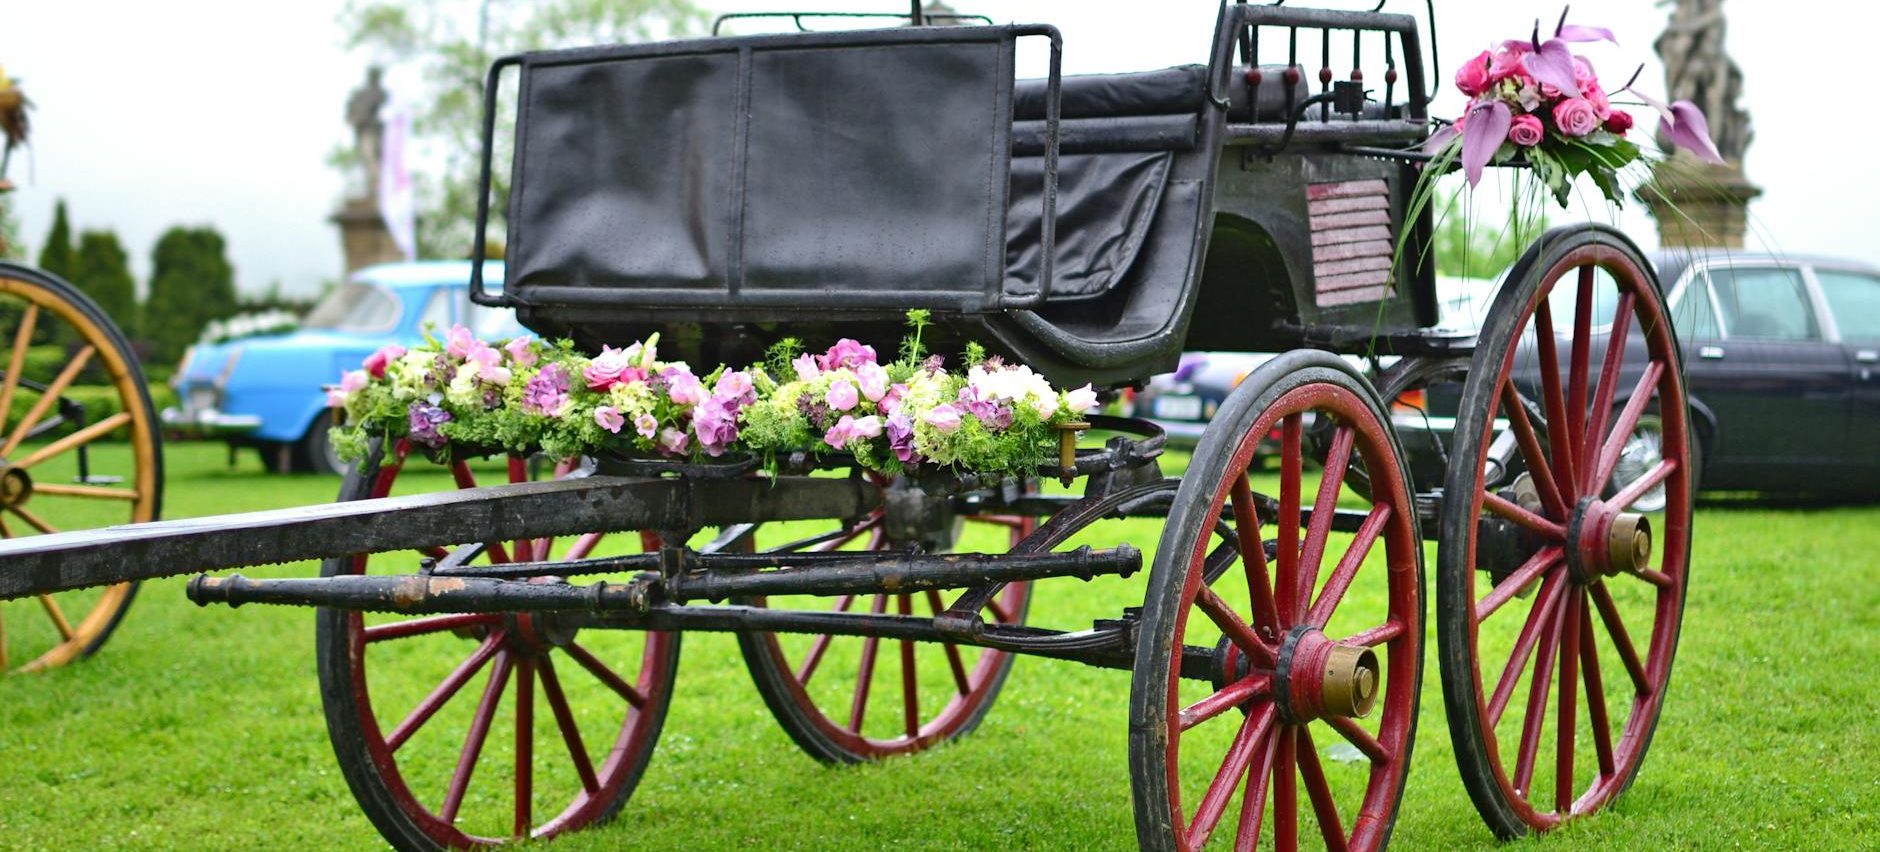 pink and purple flowers on black carriage